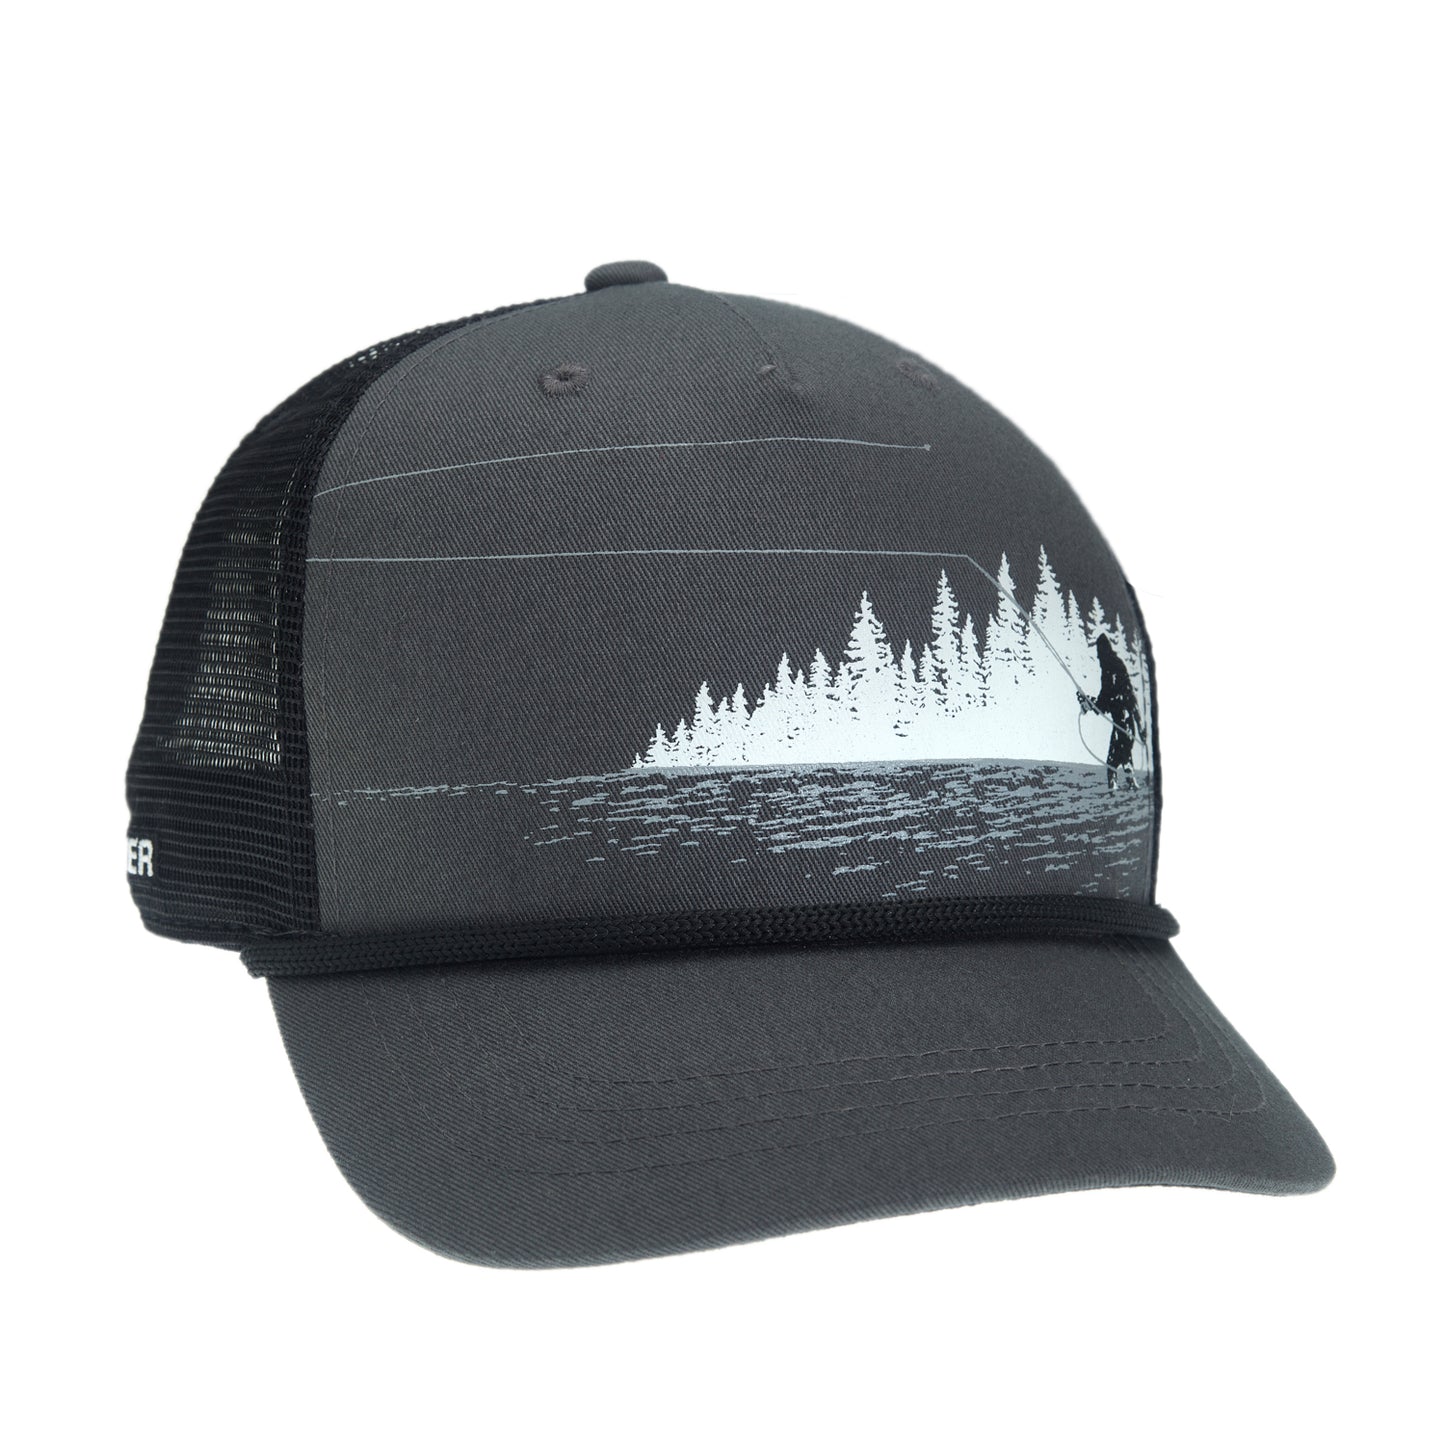 A hat with black mesh in back and gray fabric in front features a sasquatch casting a fly rod while in the water in front of pine trees and a black rope is above the brim